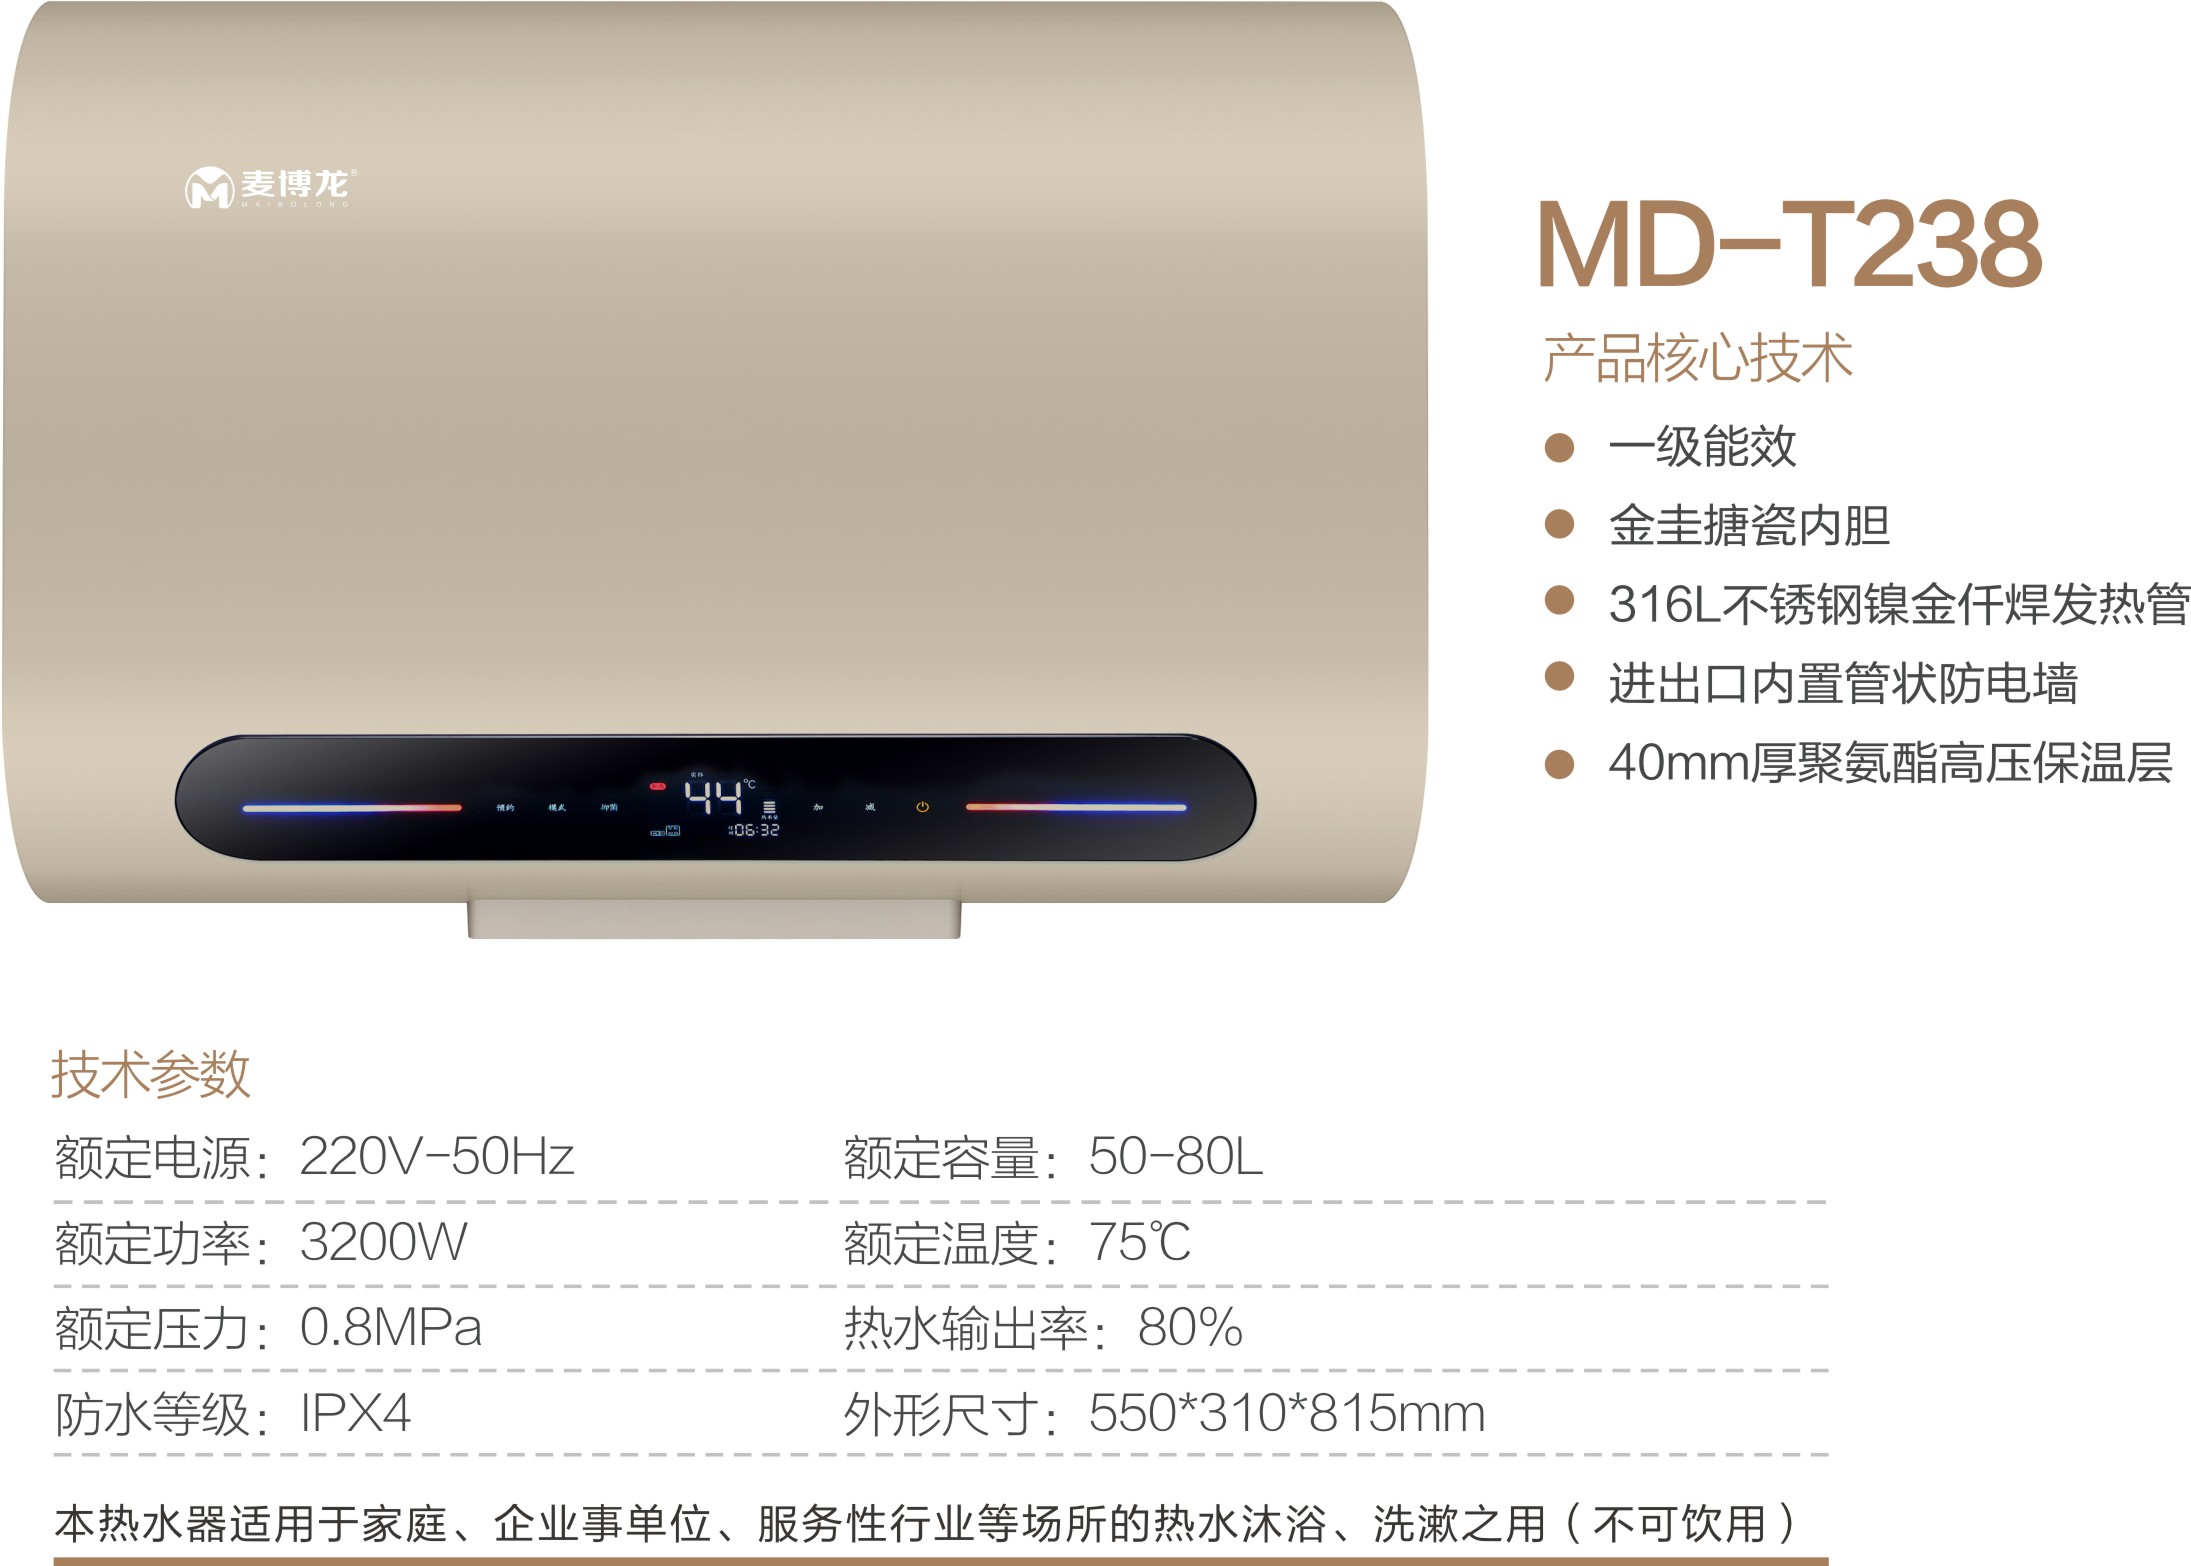 MD-T238